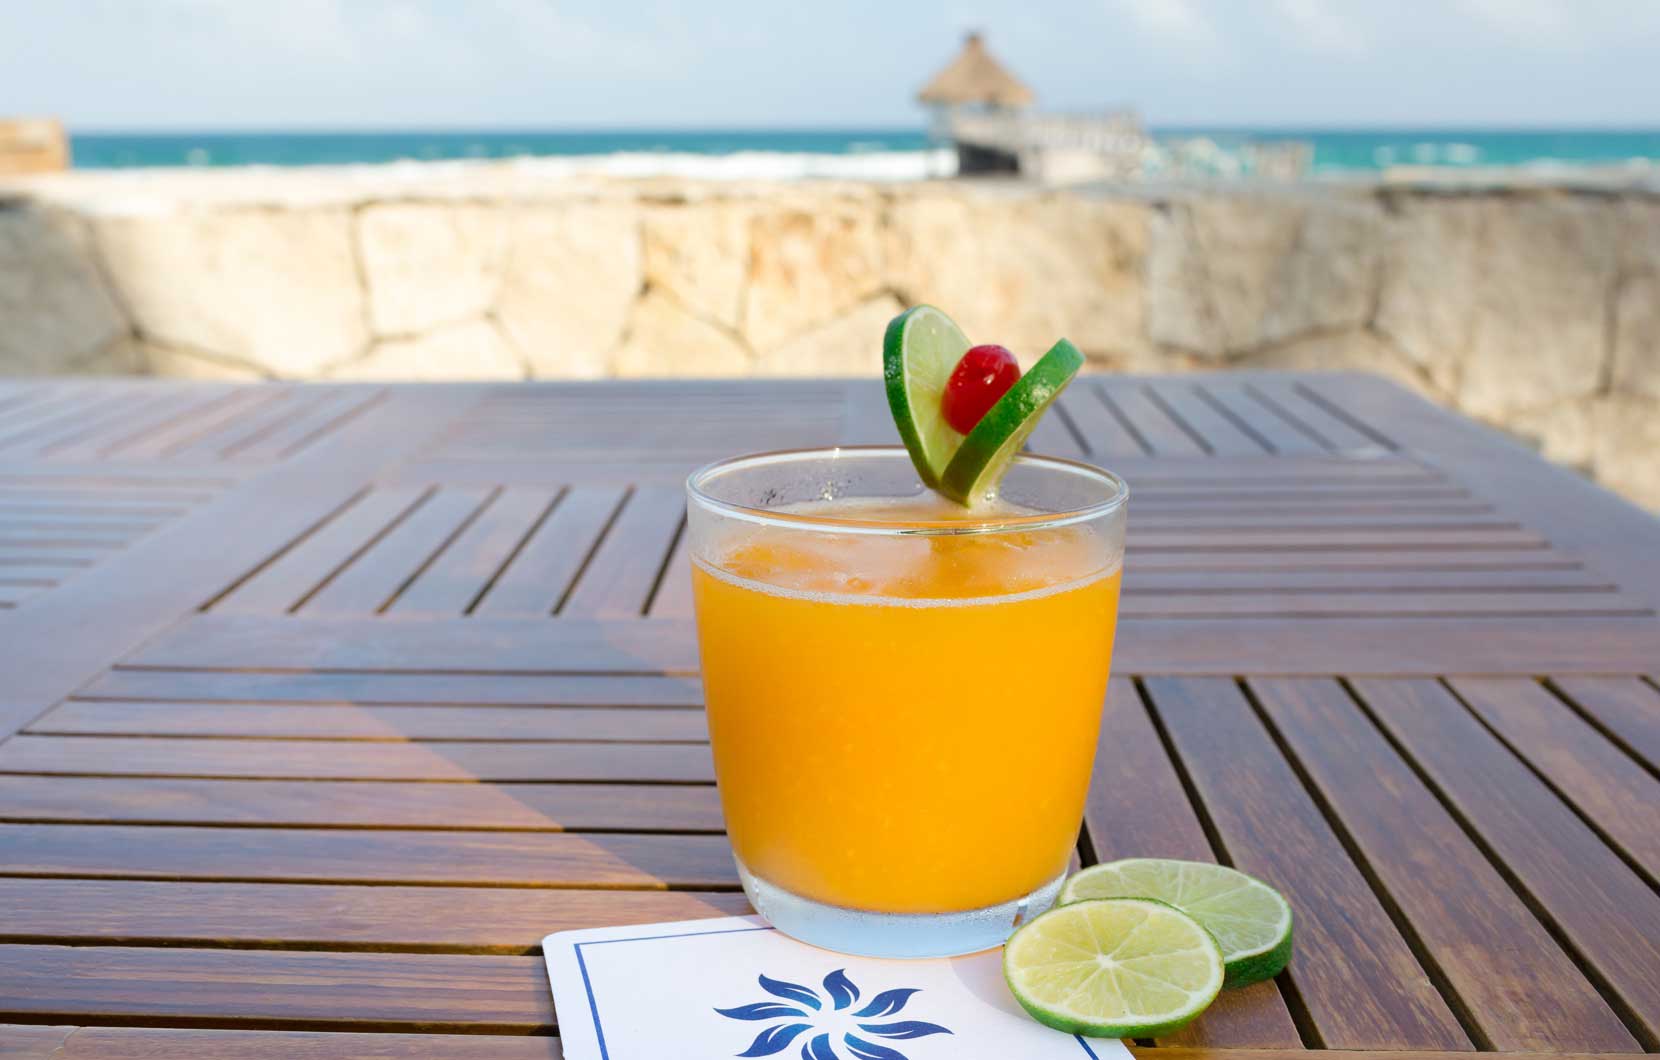 The perfect refresher after a day on the beach.